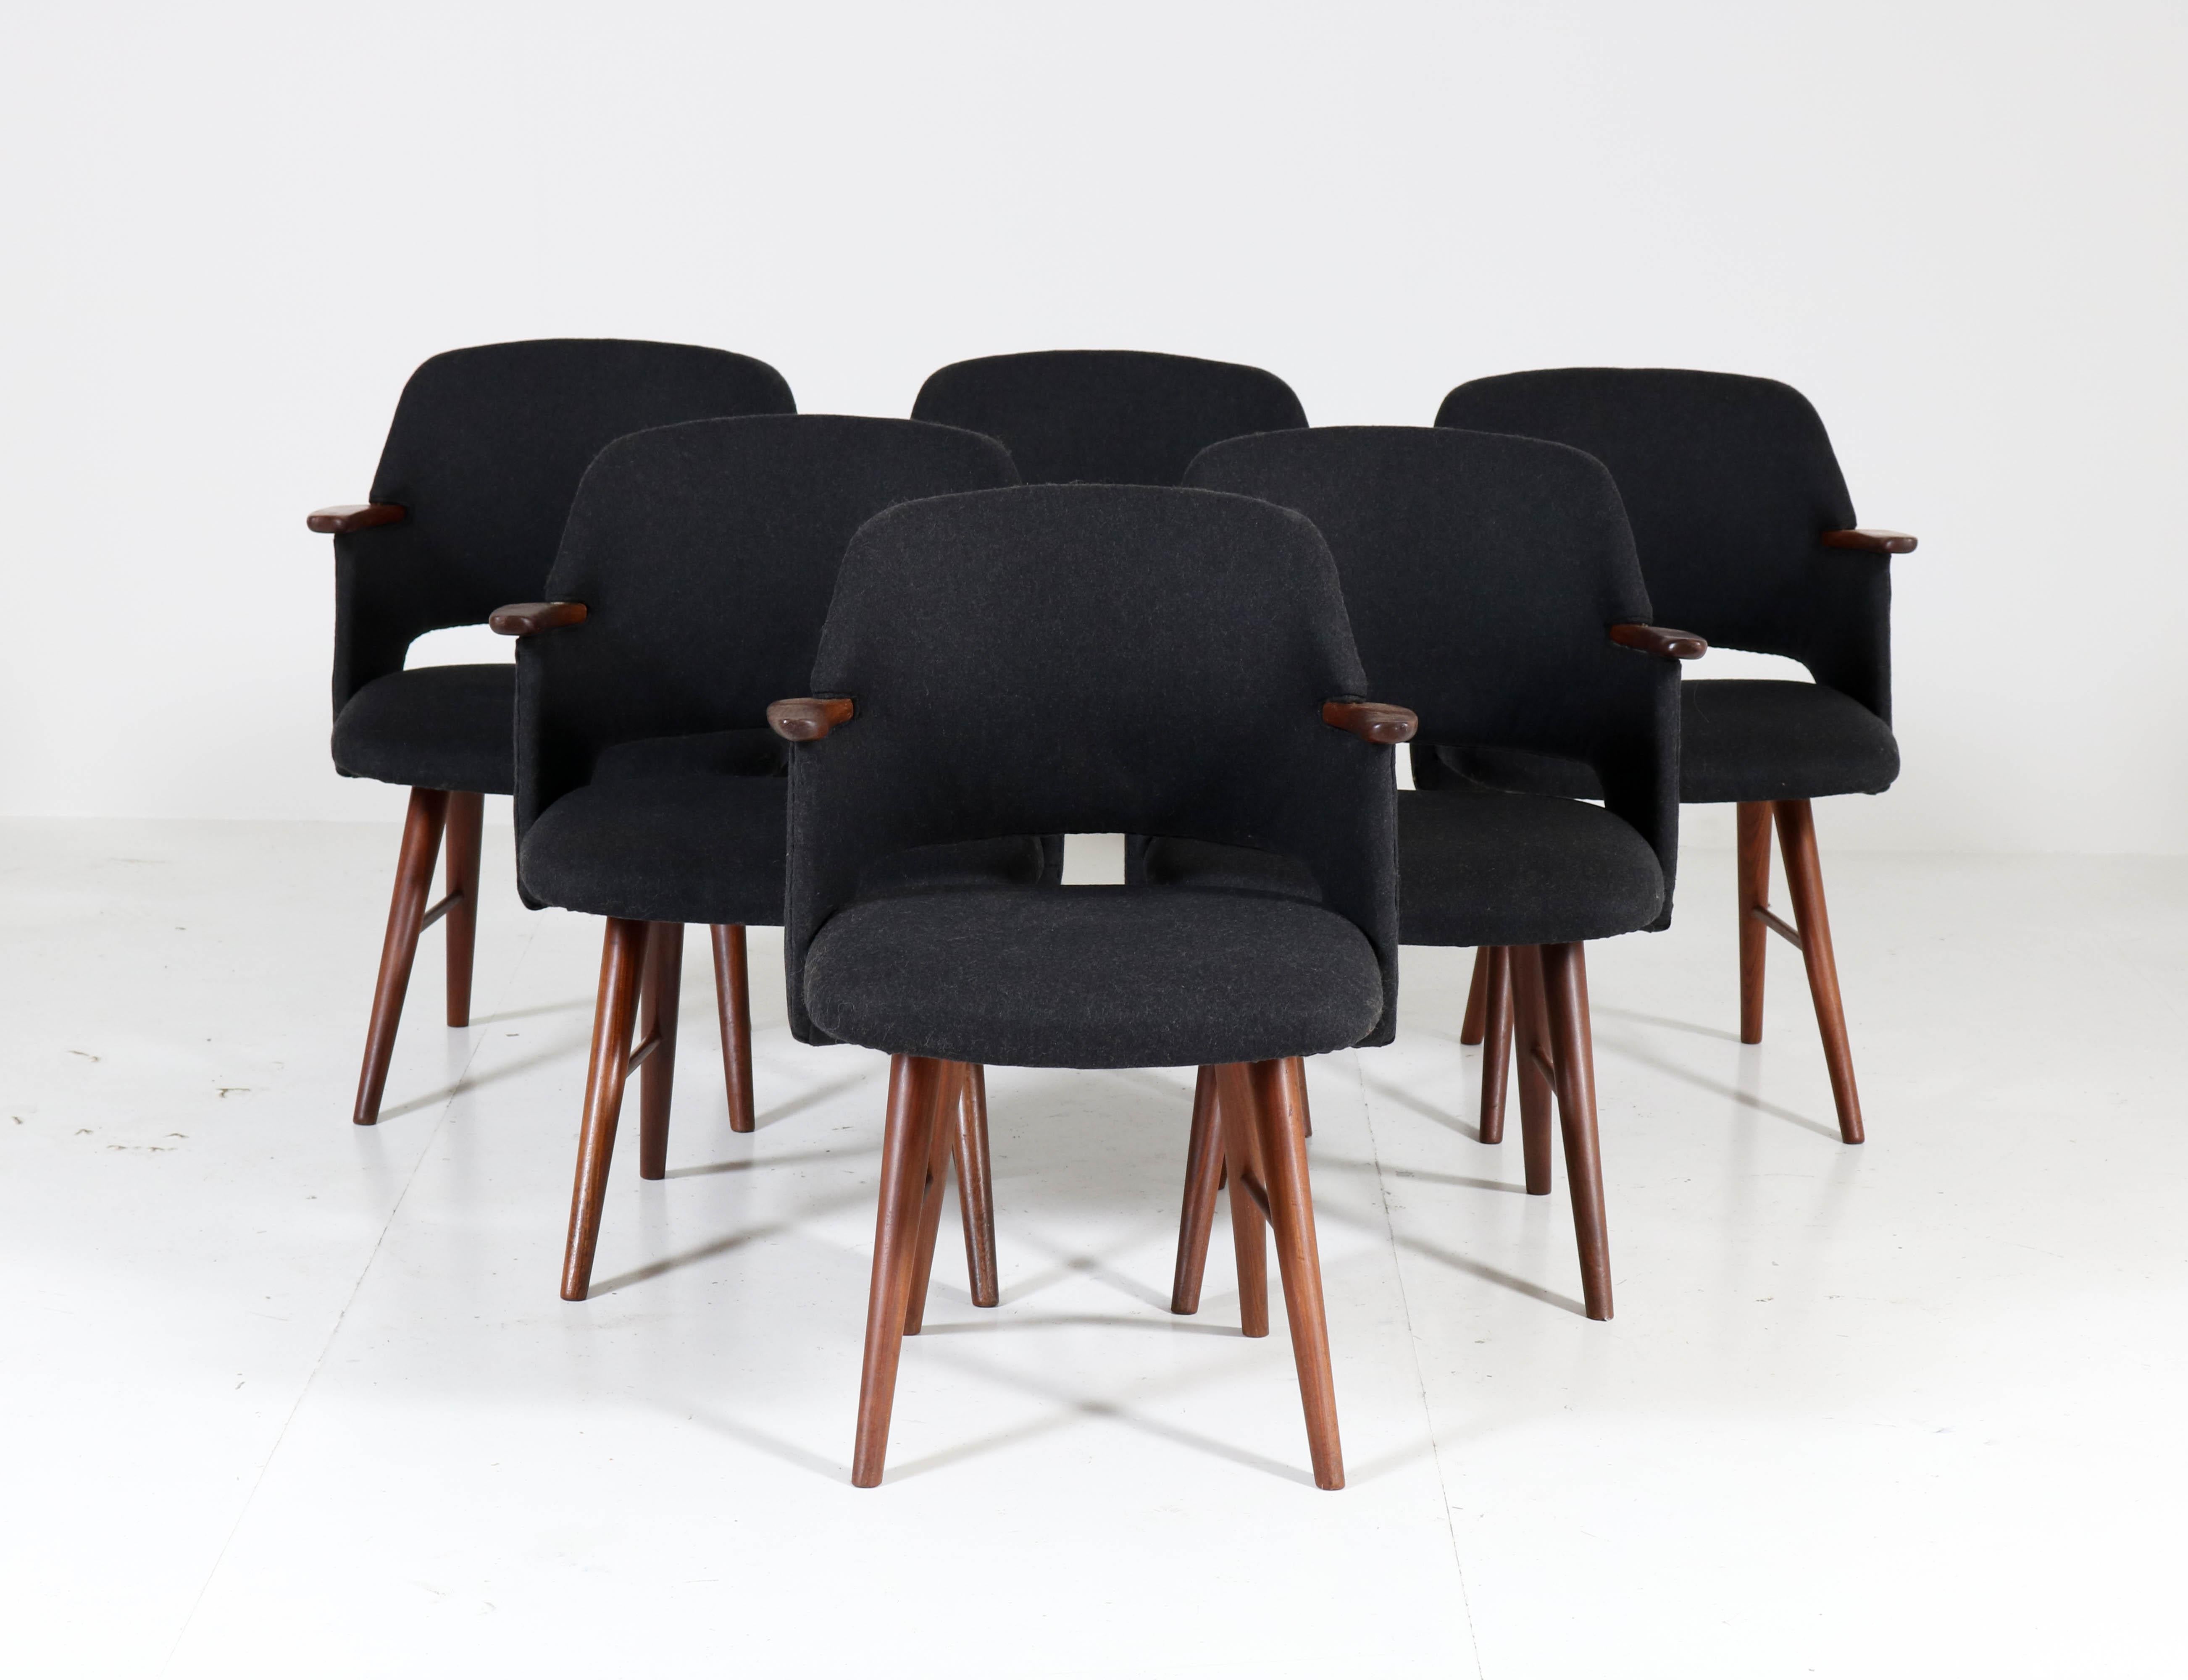 Wonderful and rare set of six Mid-Century Modern FT30 dining chairs.
Design by Cees Braakman for UMS Pastoe.
Striking Dutch design from the sixties.
Solid teak and re-upholstered with stylish Italian black velvet.
The chairs are marked with the